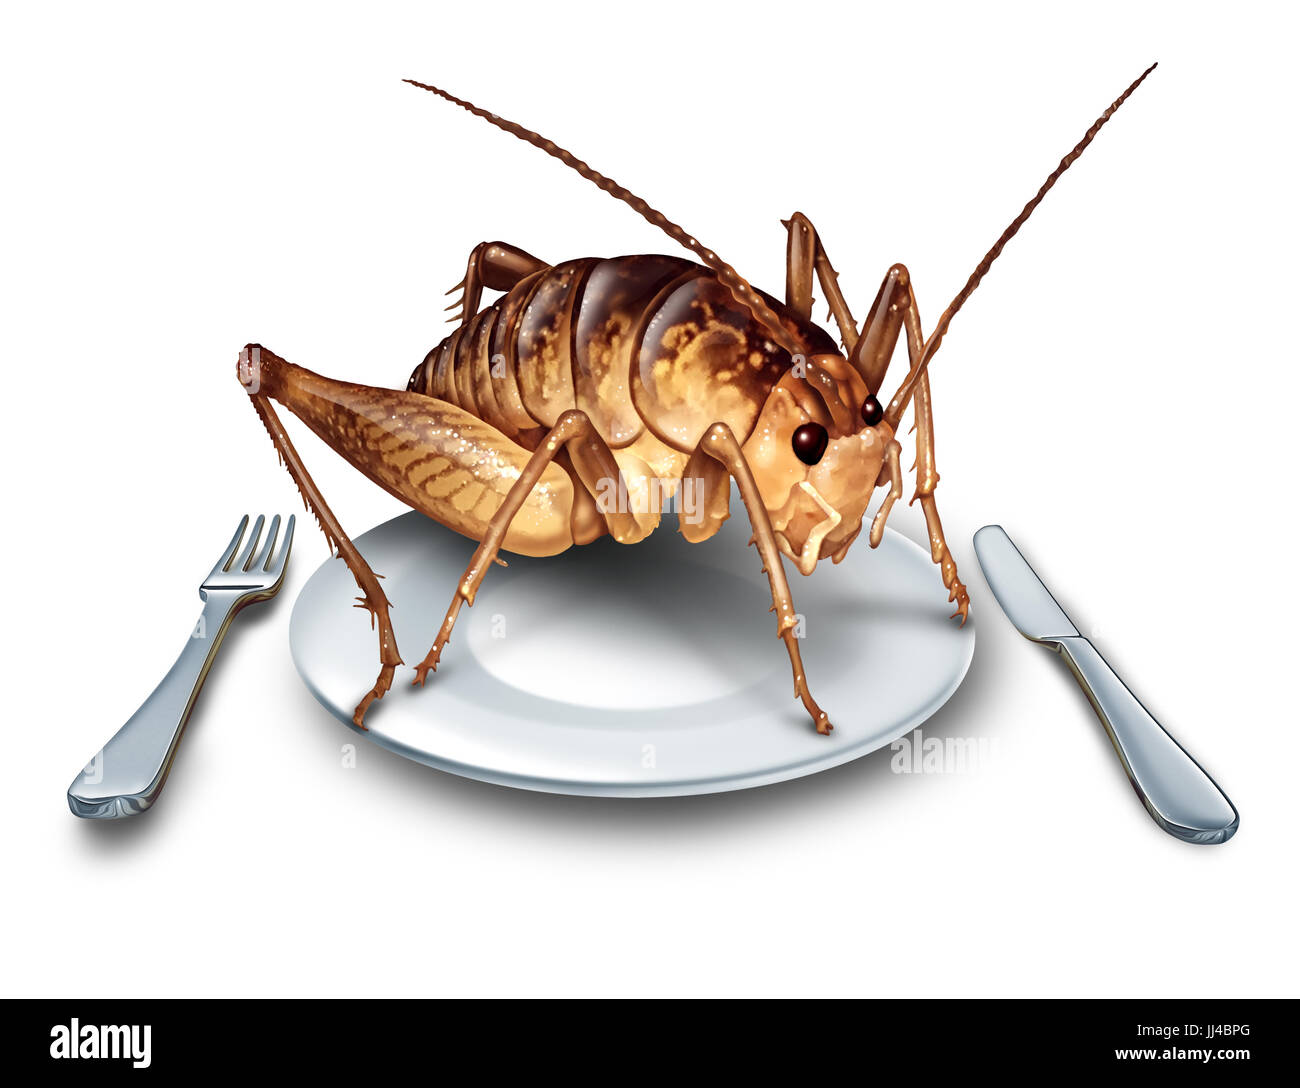 Eat bugs and eating insects as exotic cuisine and alternative high protein nutrition food as a cricket insect in a plate with knife and fork. Stock Photo